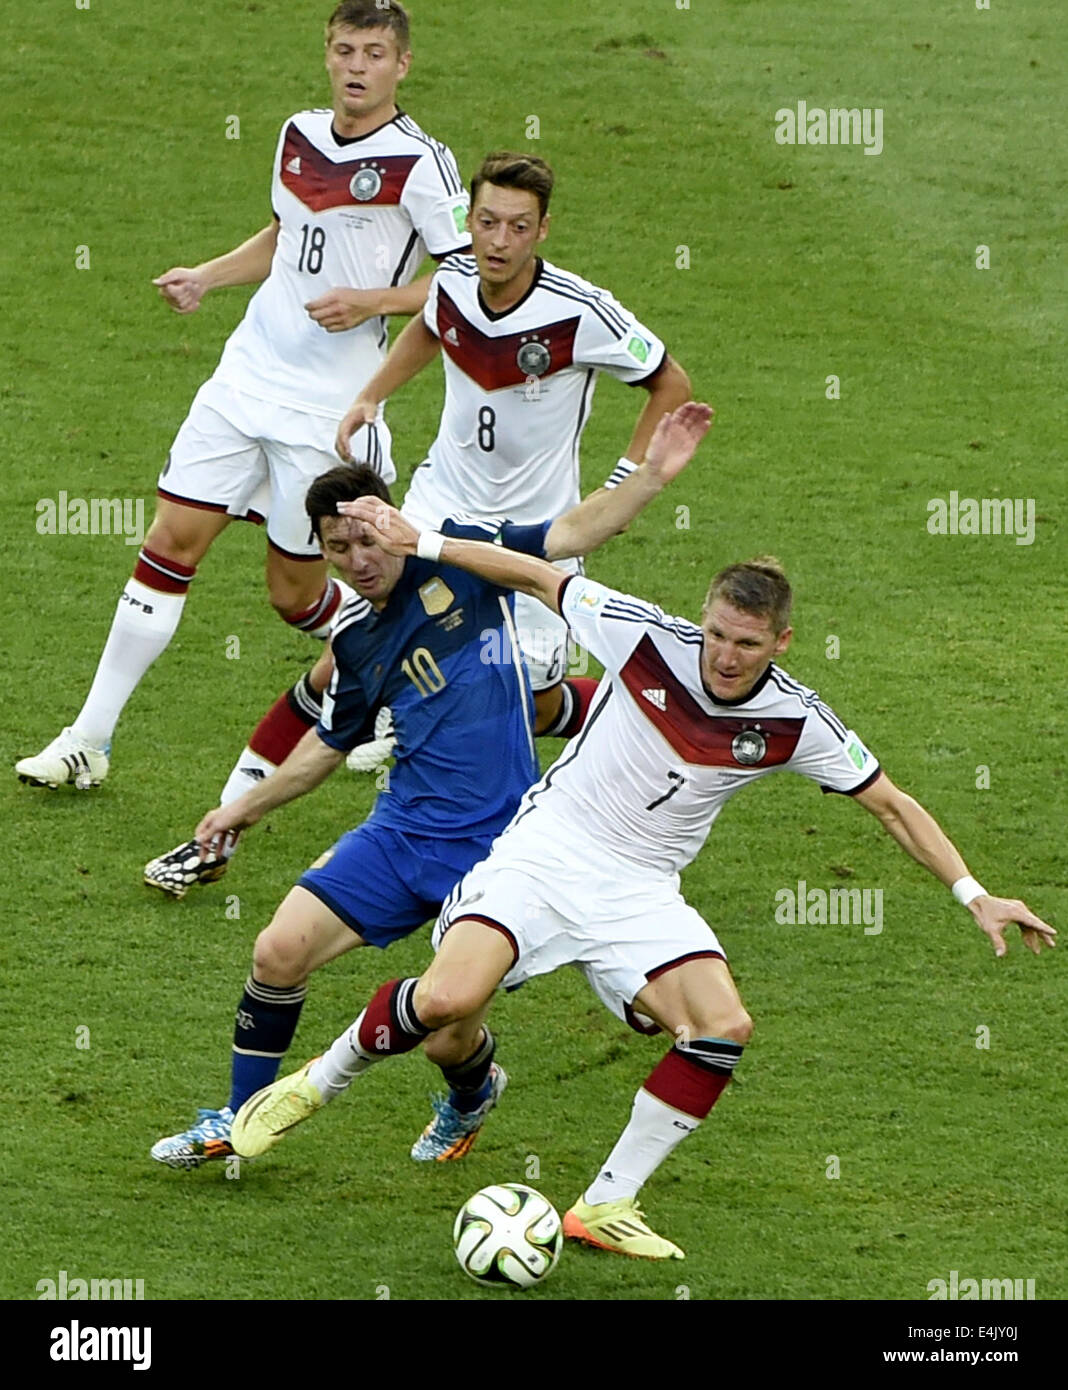 Rio De Janeiro, Brazil. 13th July, 2014. Germany's Toni Kroos (No.18), Mesut Ozil (No.8) and Bastian Schweinsteiger (No.7) vie for the ball with Argentina's Lionel Messi during the final match between Germany and Argentina of 2014 FIFA World Cup at the Estadio do Maracana Stadium in Rio de Janeiro, Brazil, on July 13, 2014. Credit:  Lui Siu Wai/Xinhua/Alamy Live News Stock Photo